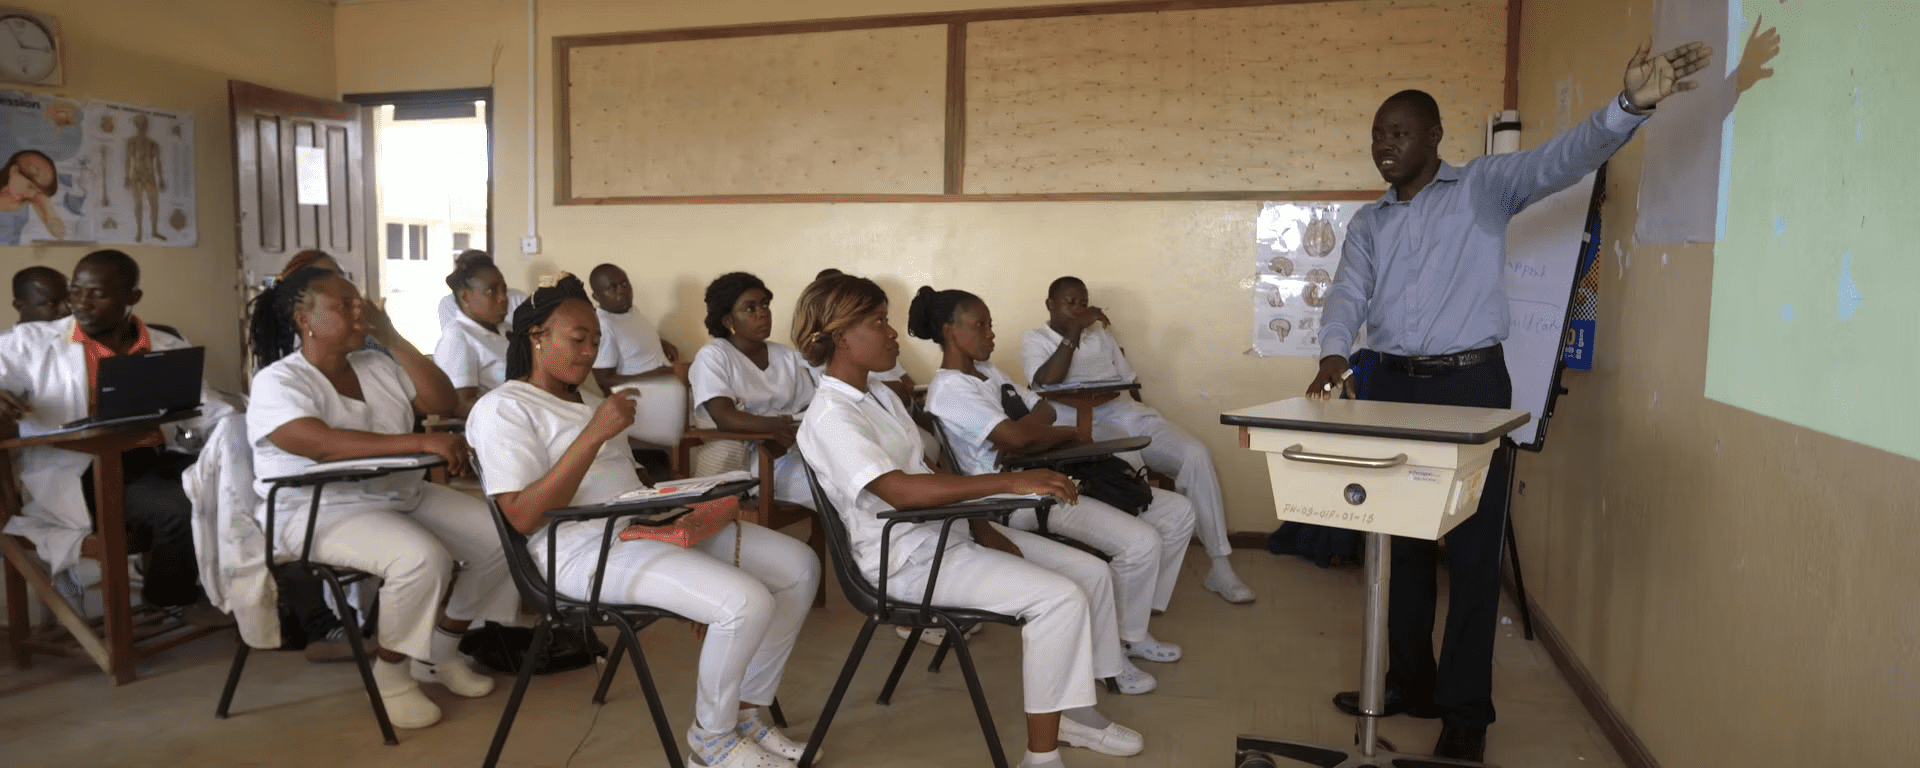 creating a workforce of mental health clinicians in liberia